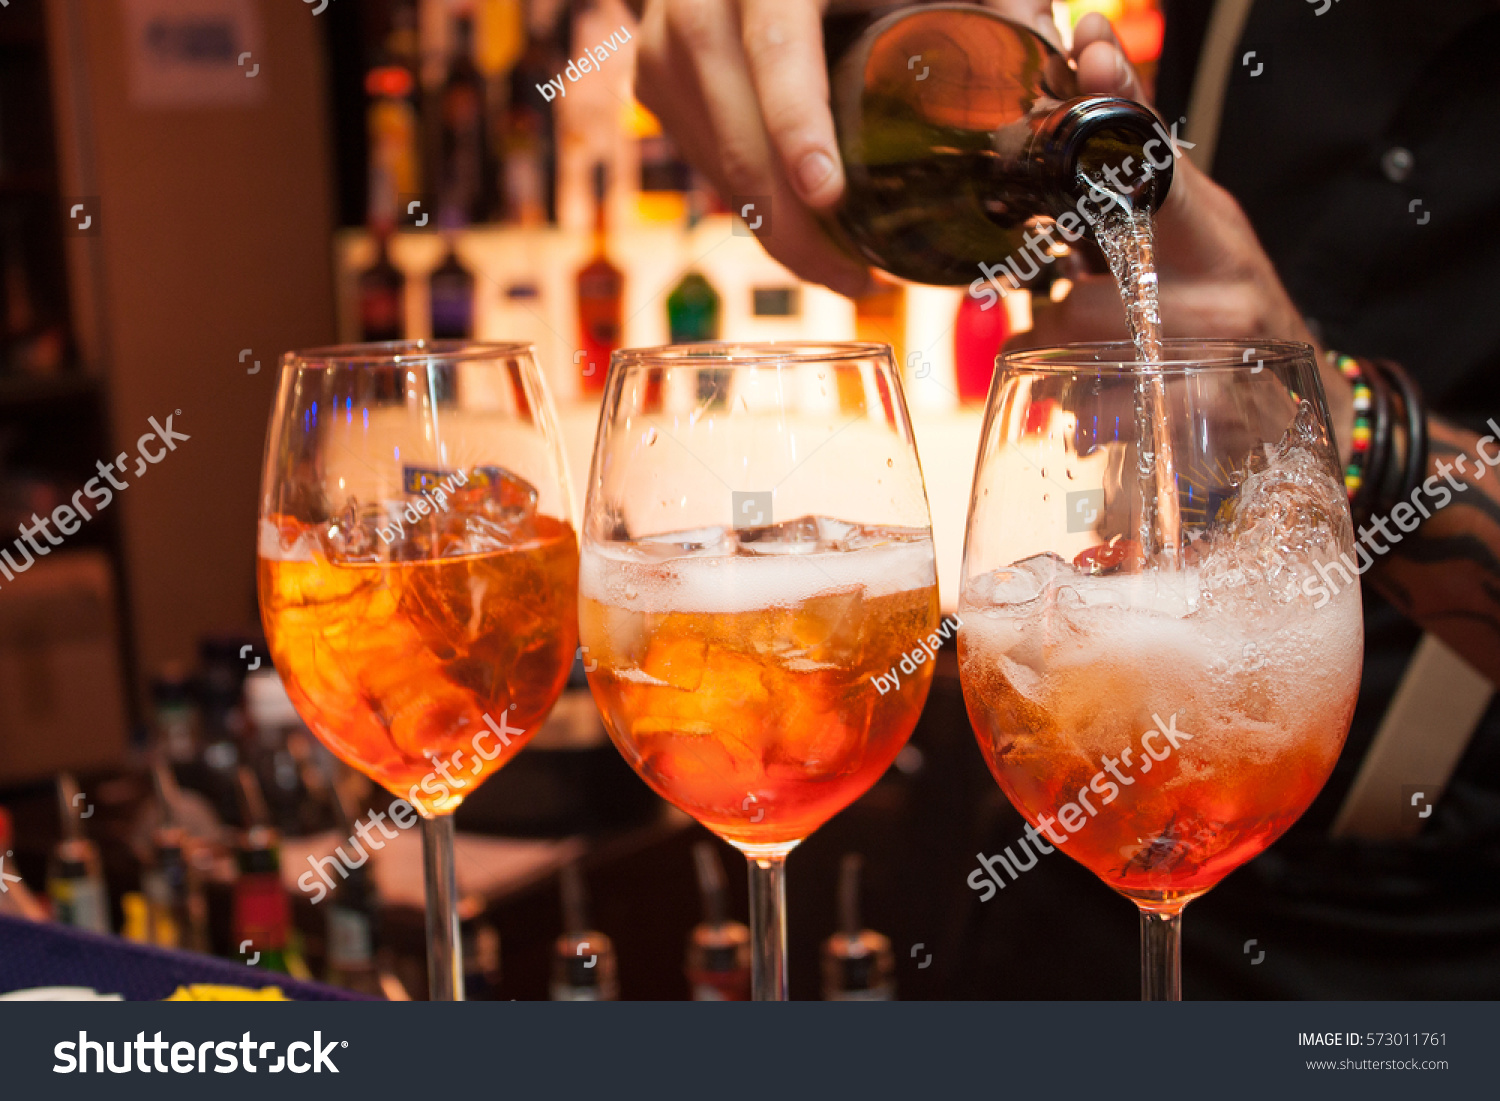 three glasses of cocktails on the bar. bartender pours a glass of sparkling wine with Aperol. #573011761